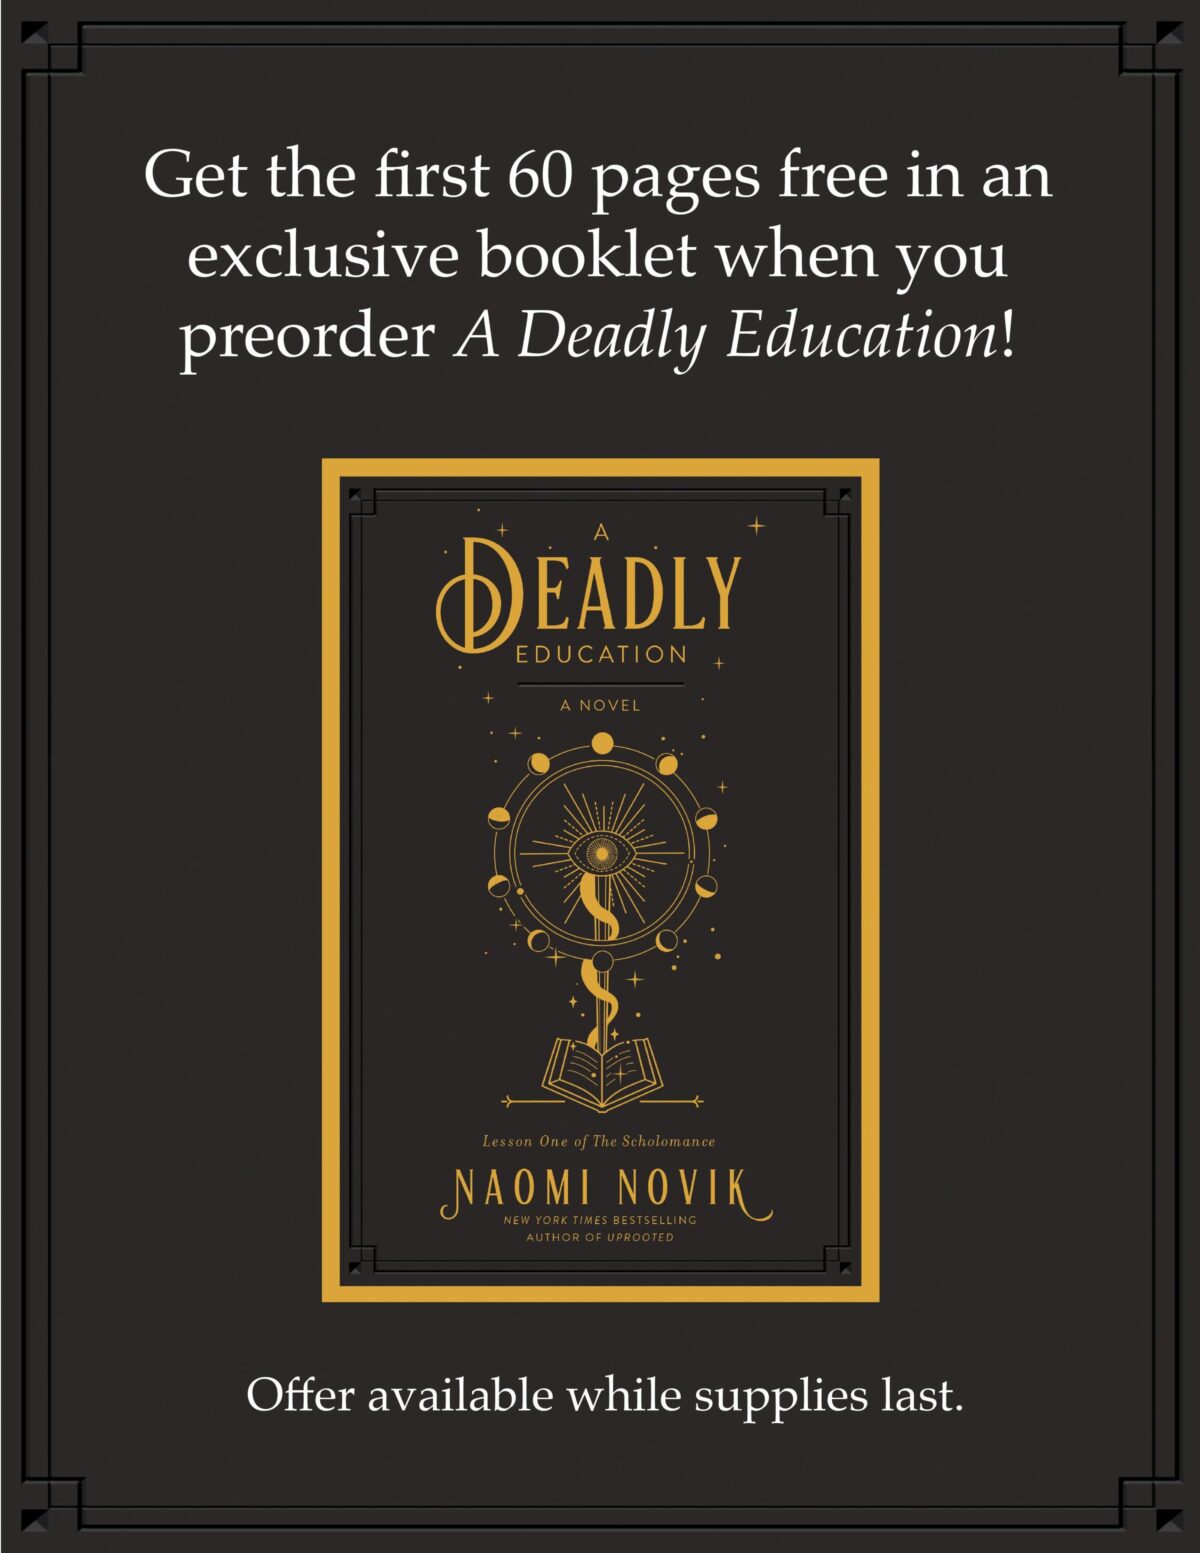 a deadly education book series